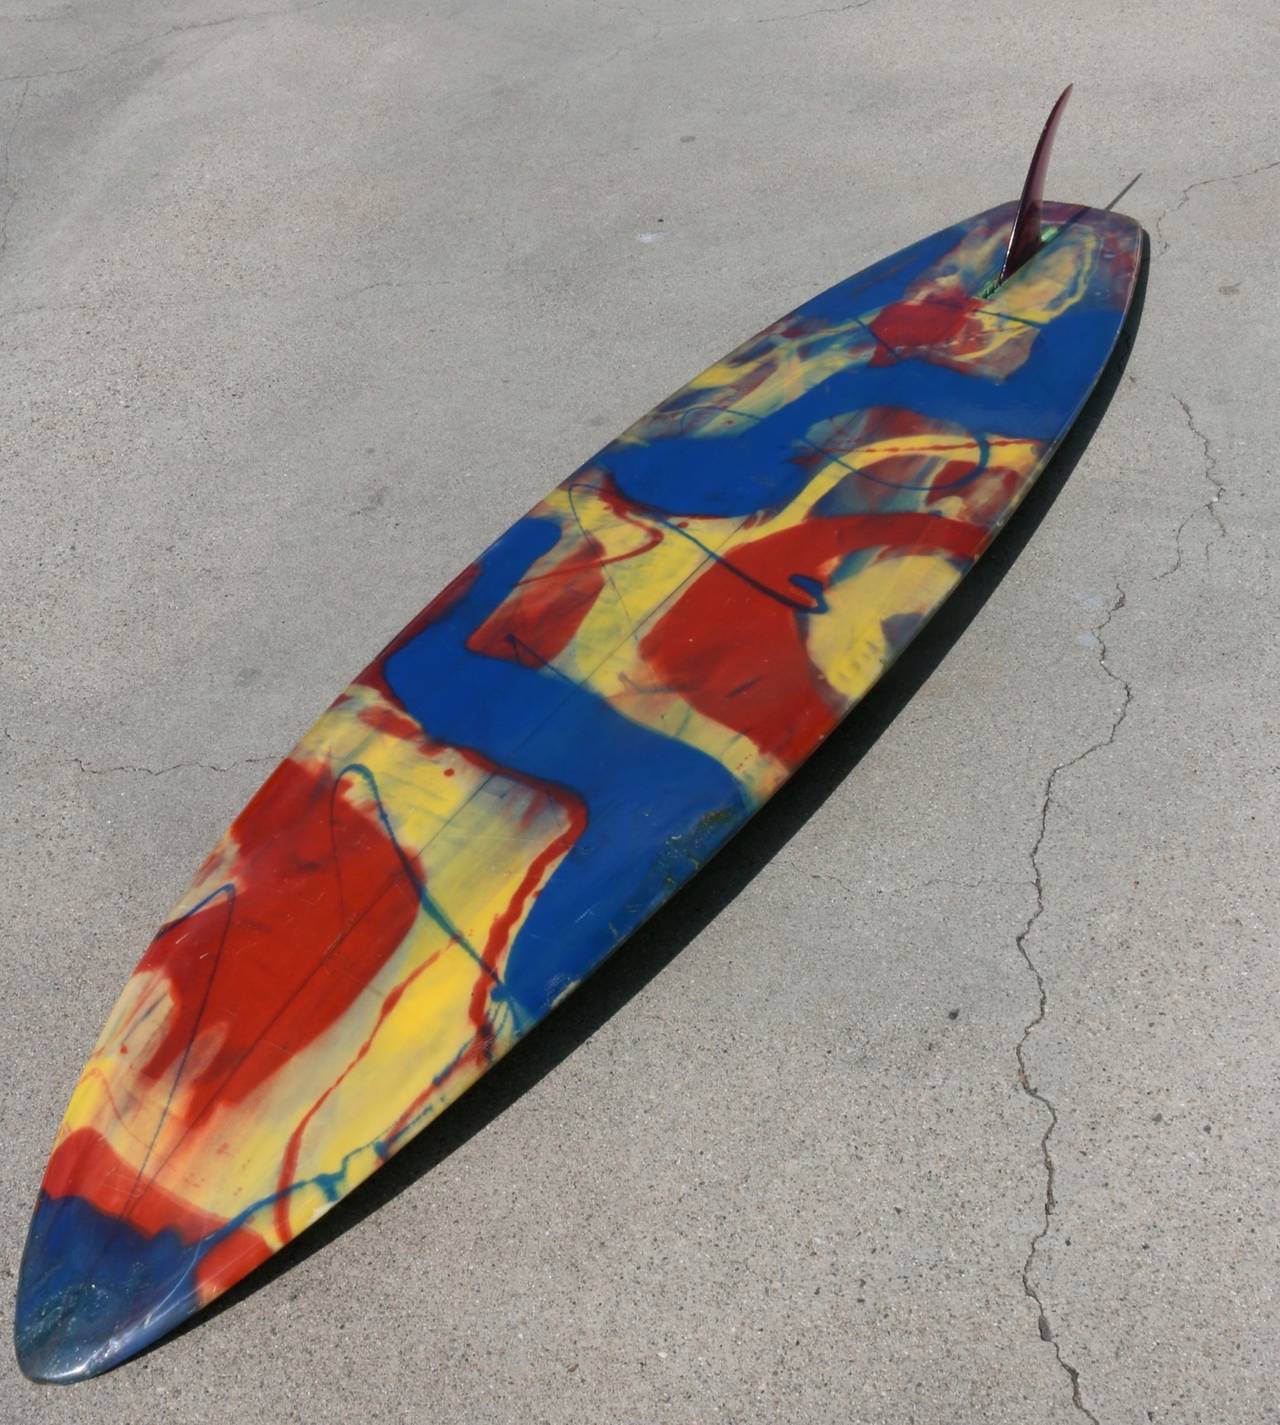 A kaleidoscope of color carving through the waves, that's what we think of when we look at this traditional Dewey Weber Ski Surfboard. Red and blue paint artistically splattered creating a decorative explosion on the bottom and wonderful accents on